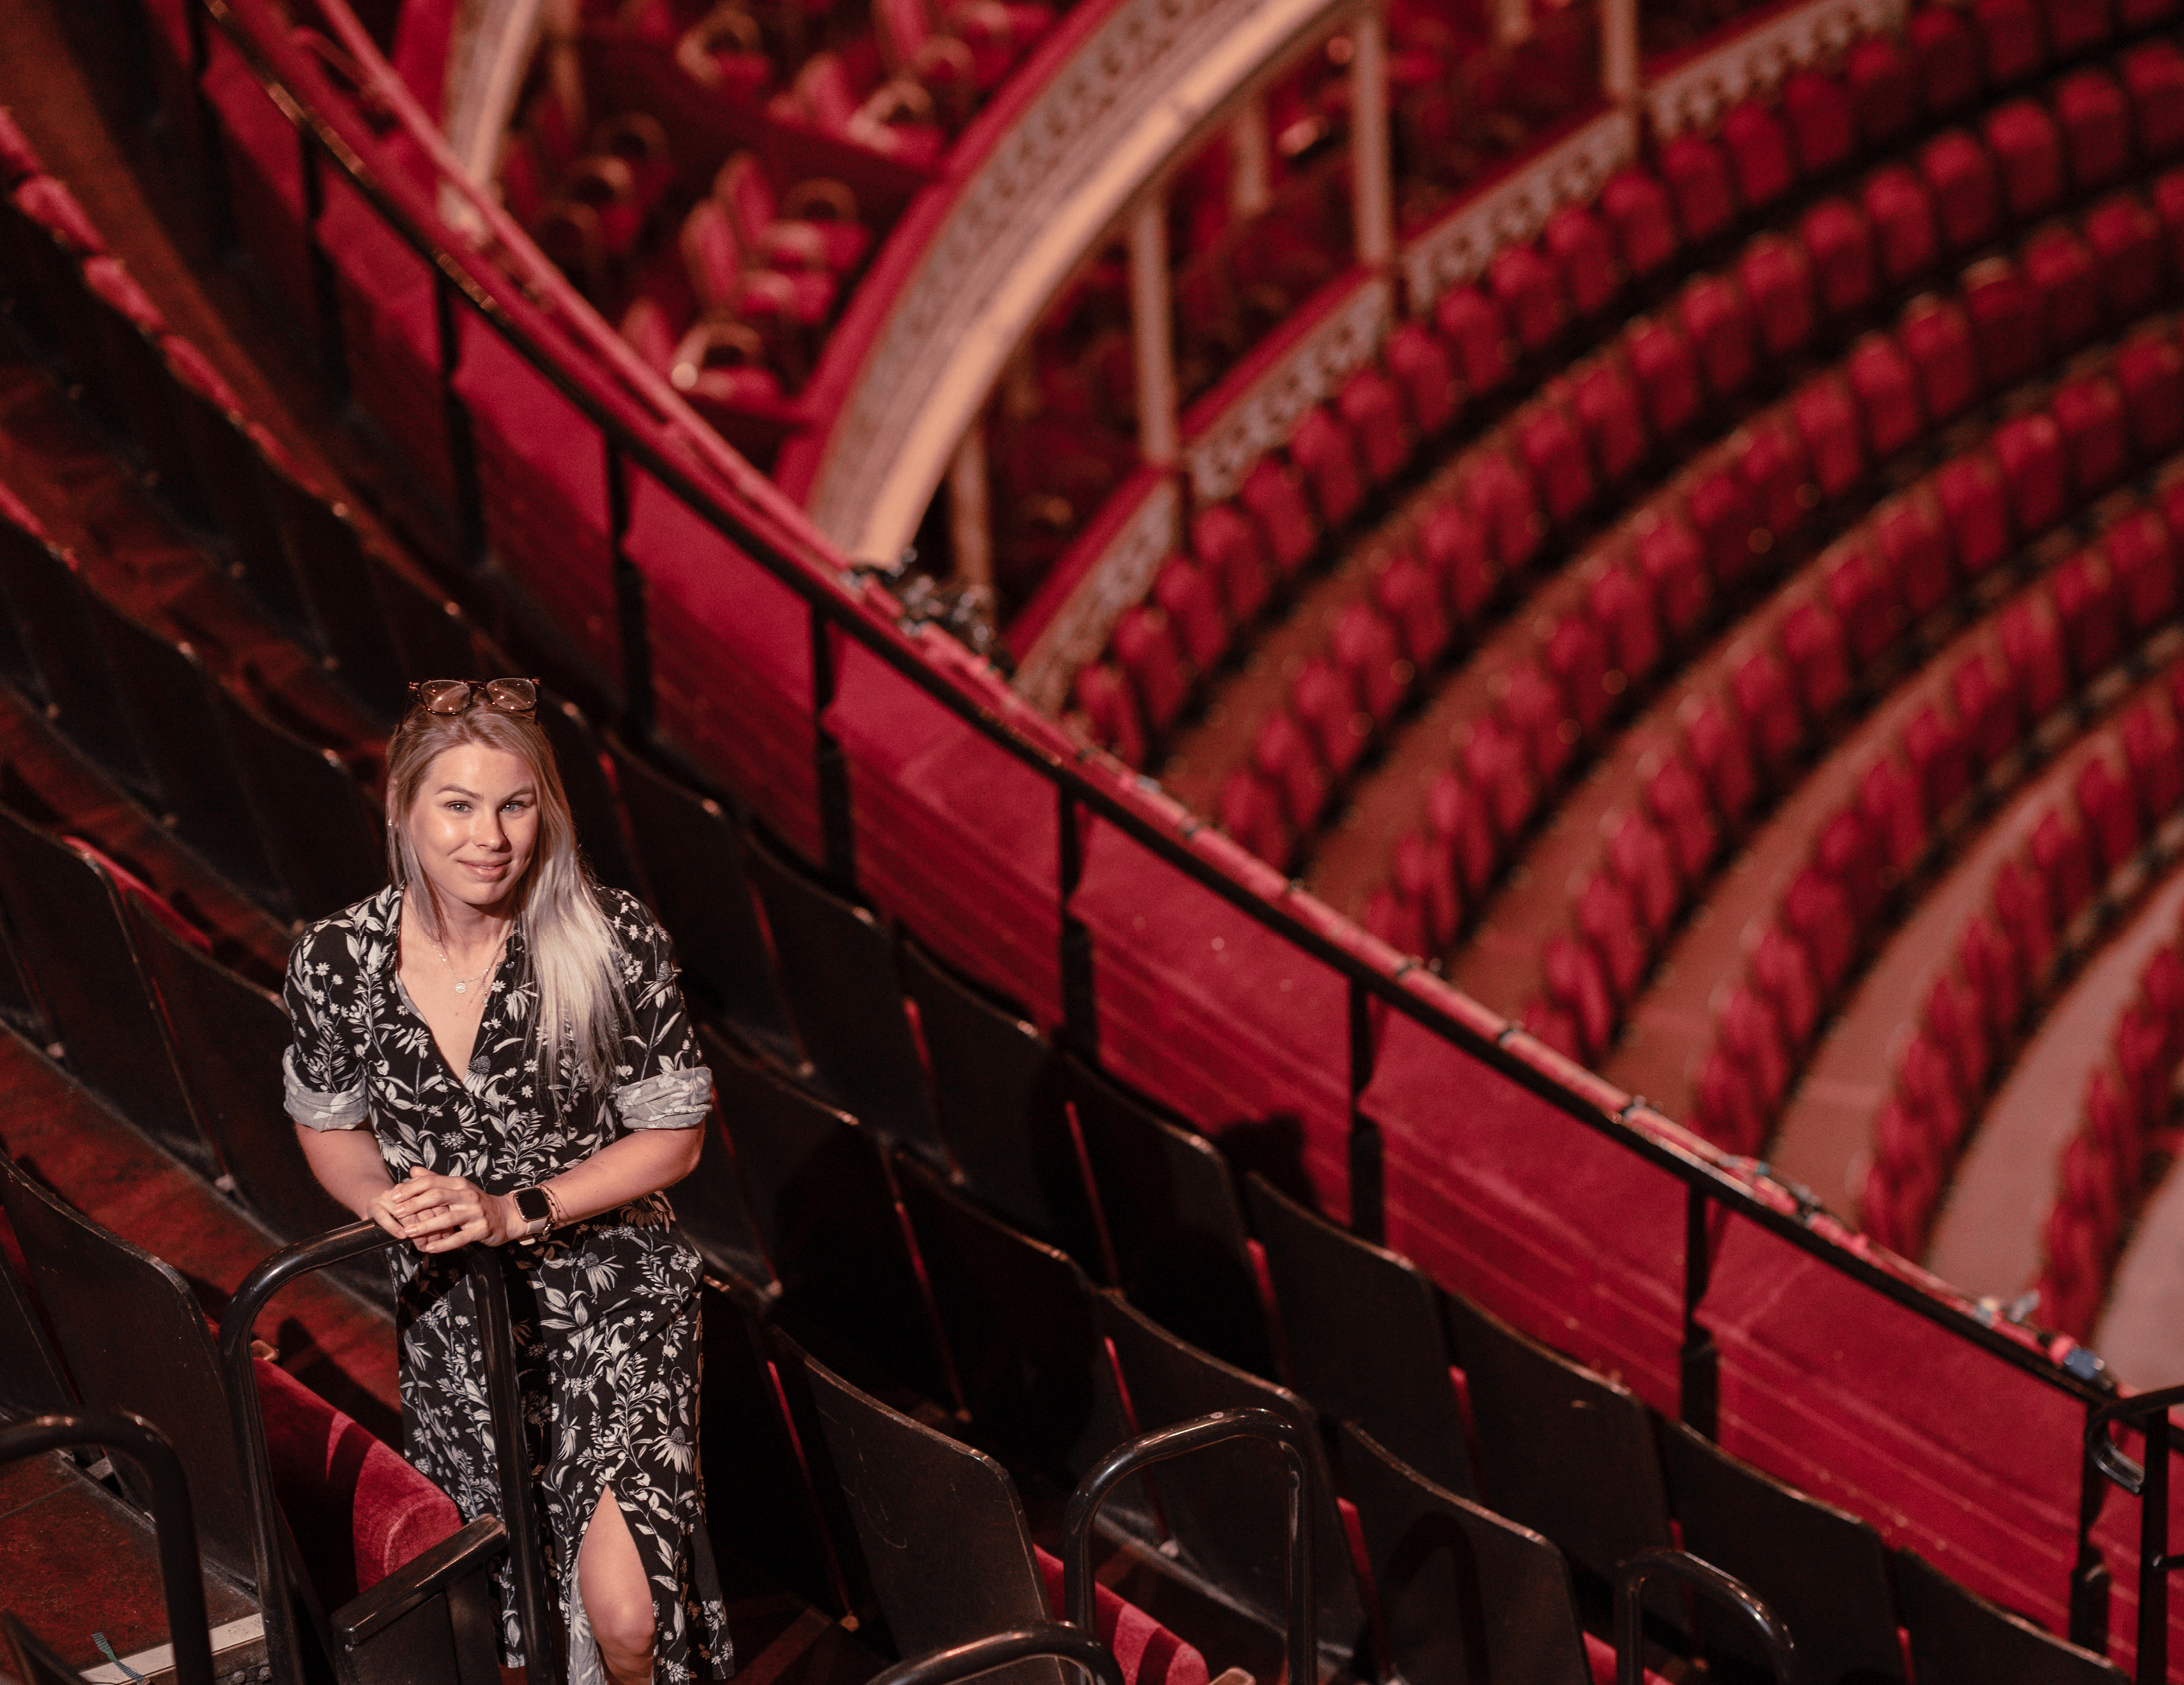 Looking down on woman stood amongst theatre seats